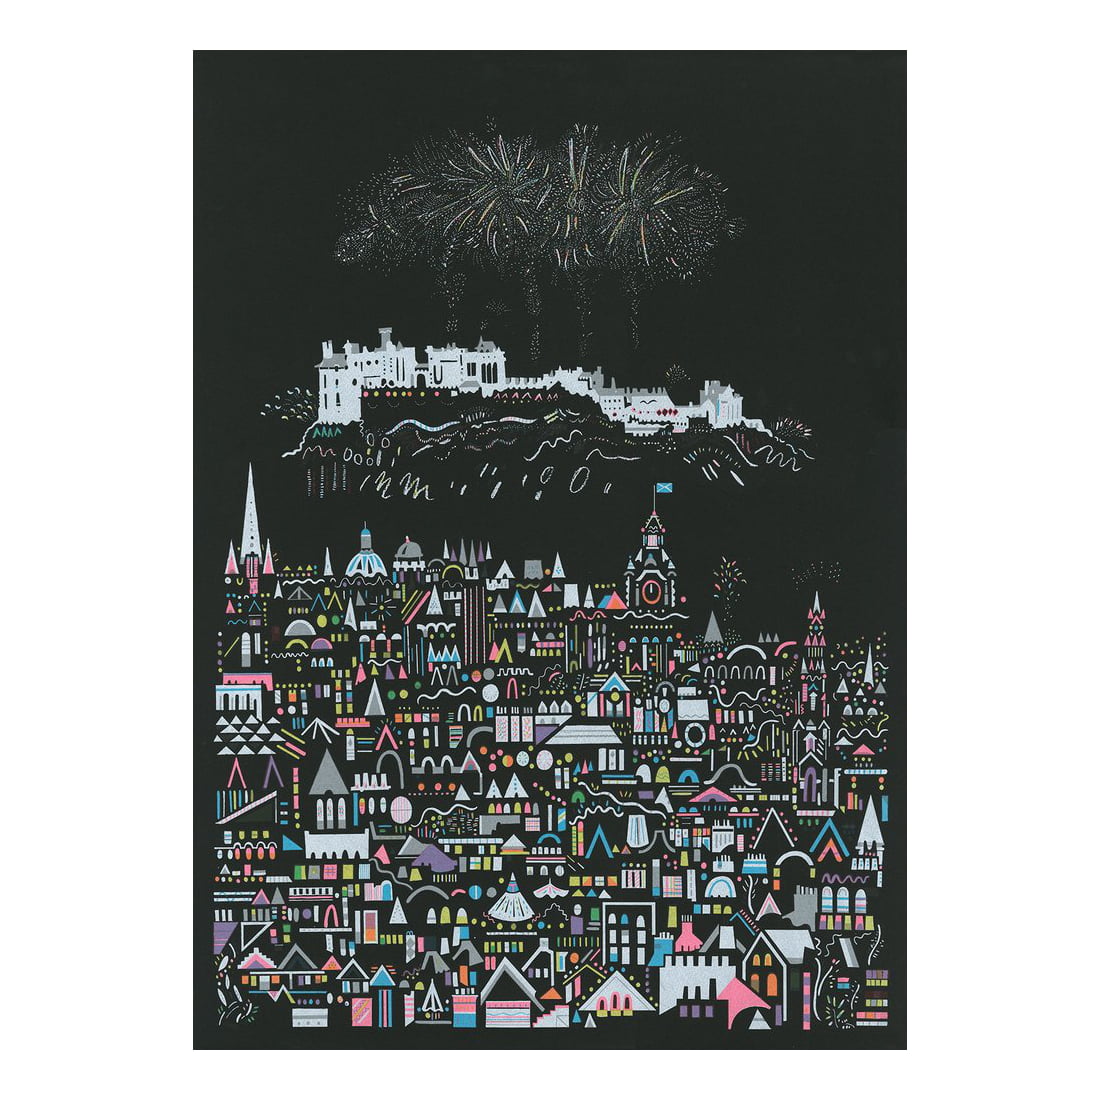 Firework by Susie Wright - Limited Edition Screen Print